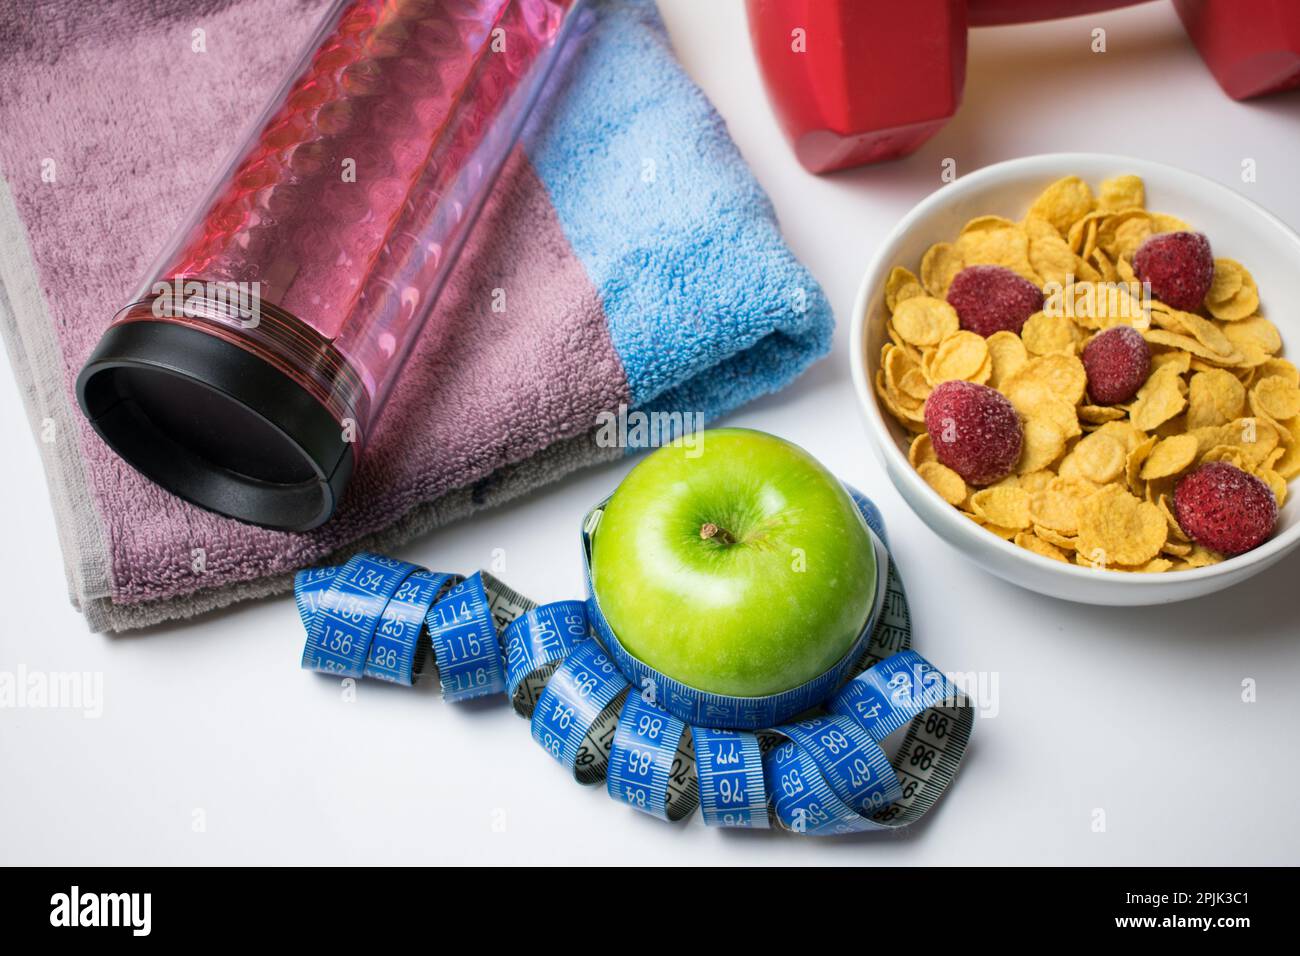 Healthy food, weight loss and diet concept, green apple, measuring tape, dumbbell, towel, cereal and bottle of water  on a white background. Stock Photo